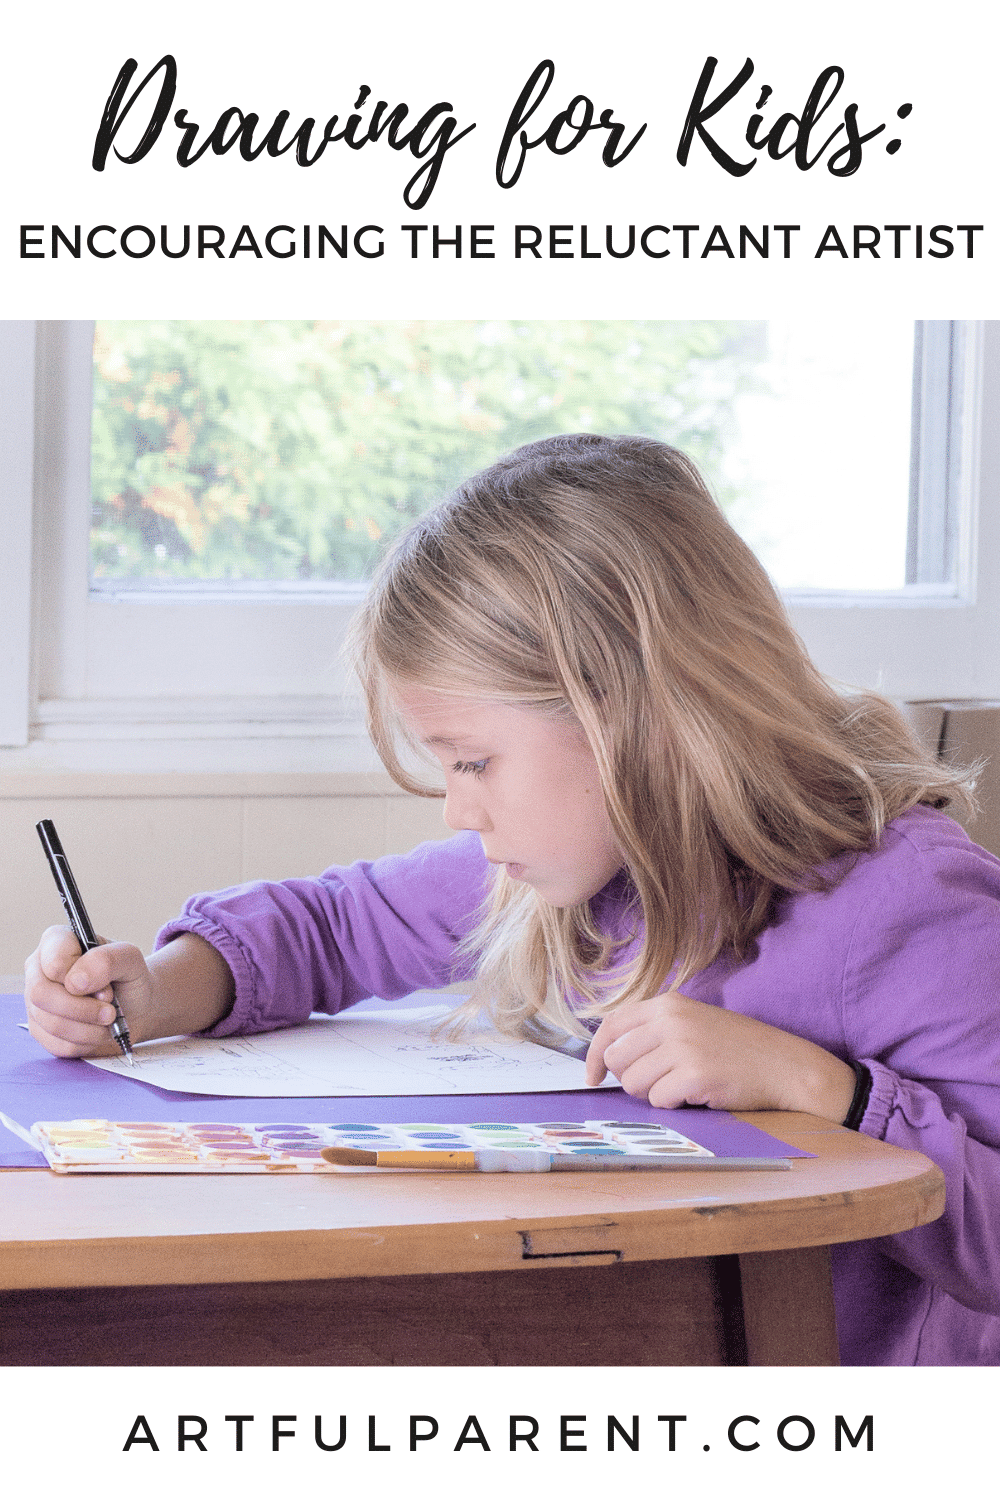 Drawing for Kids: Encouraging the Reluctant Artist